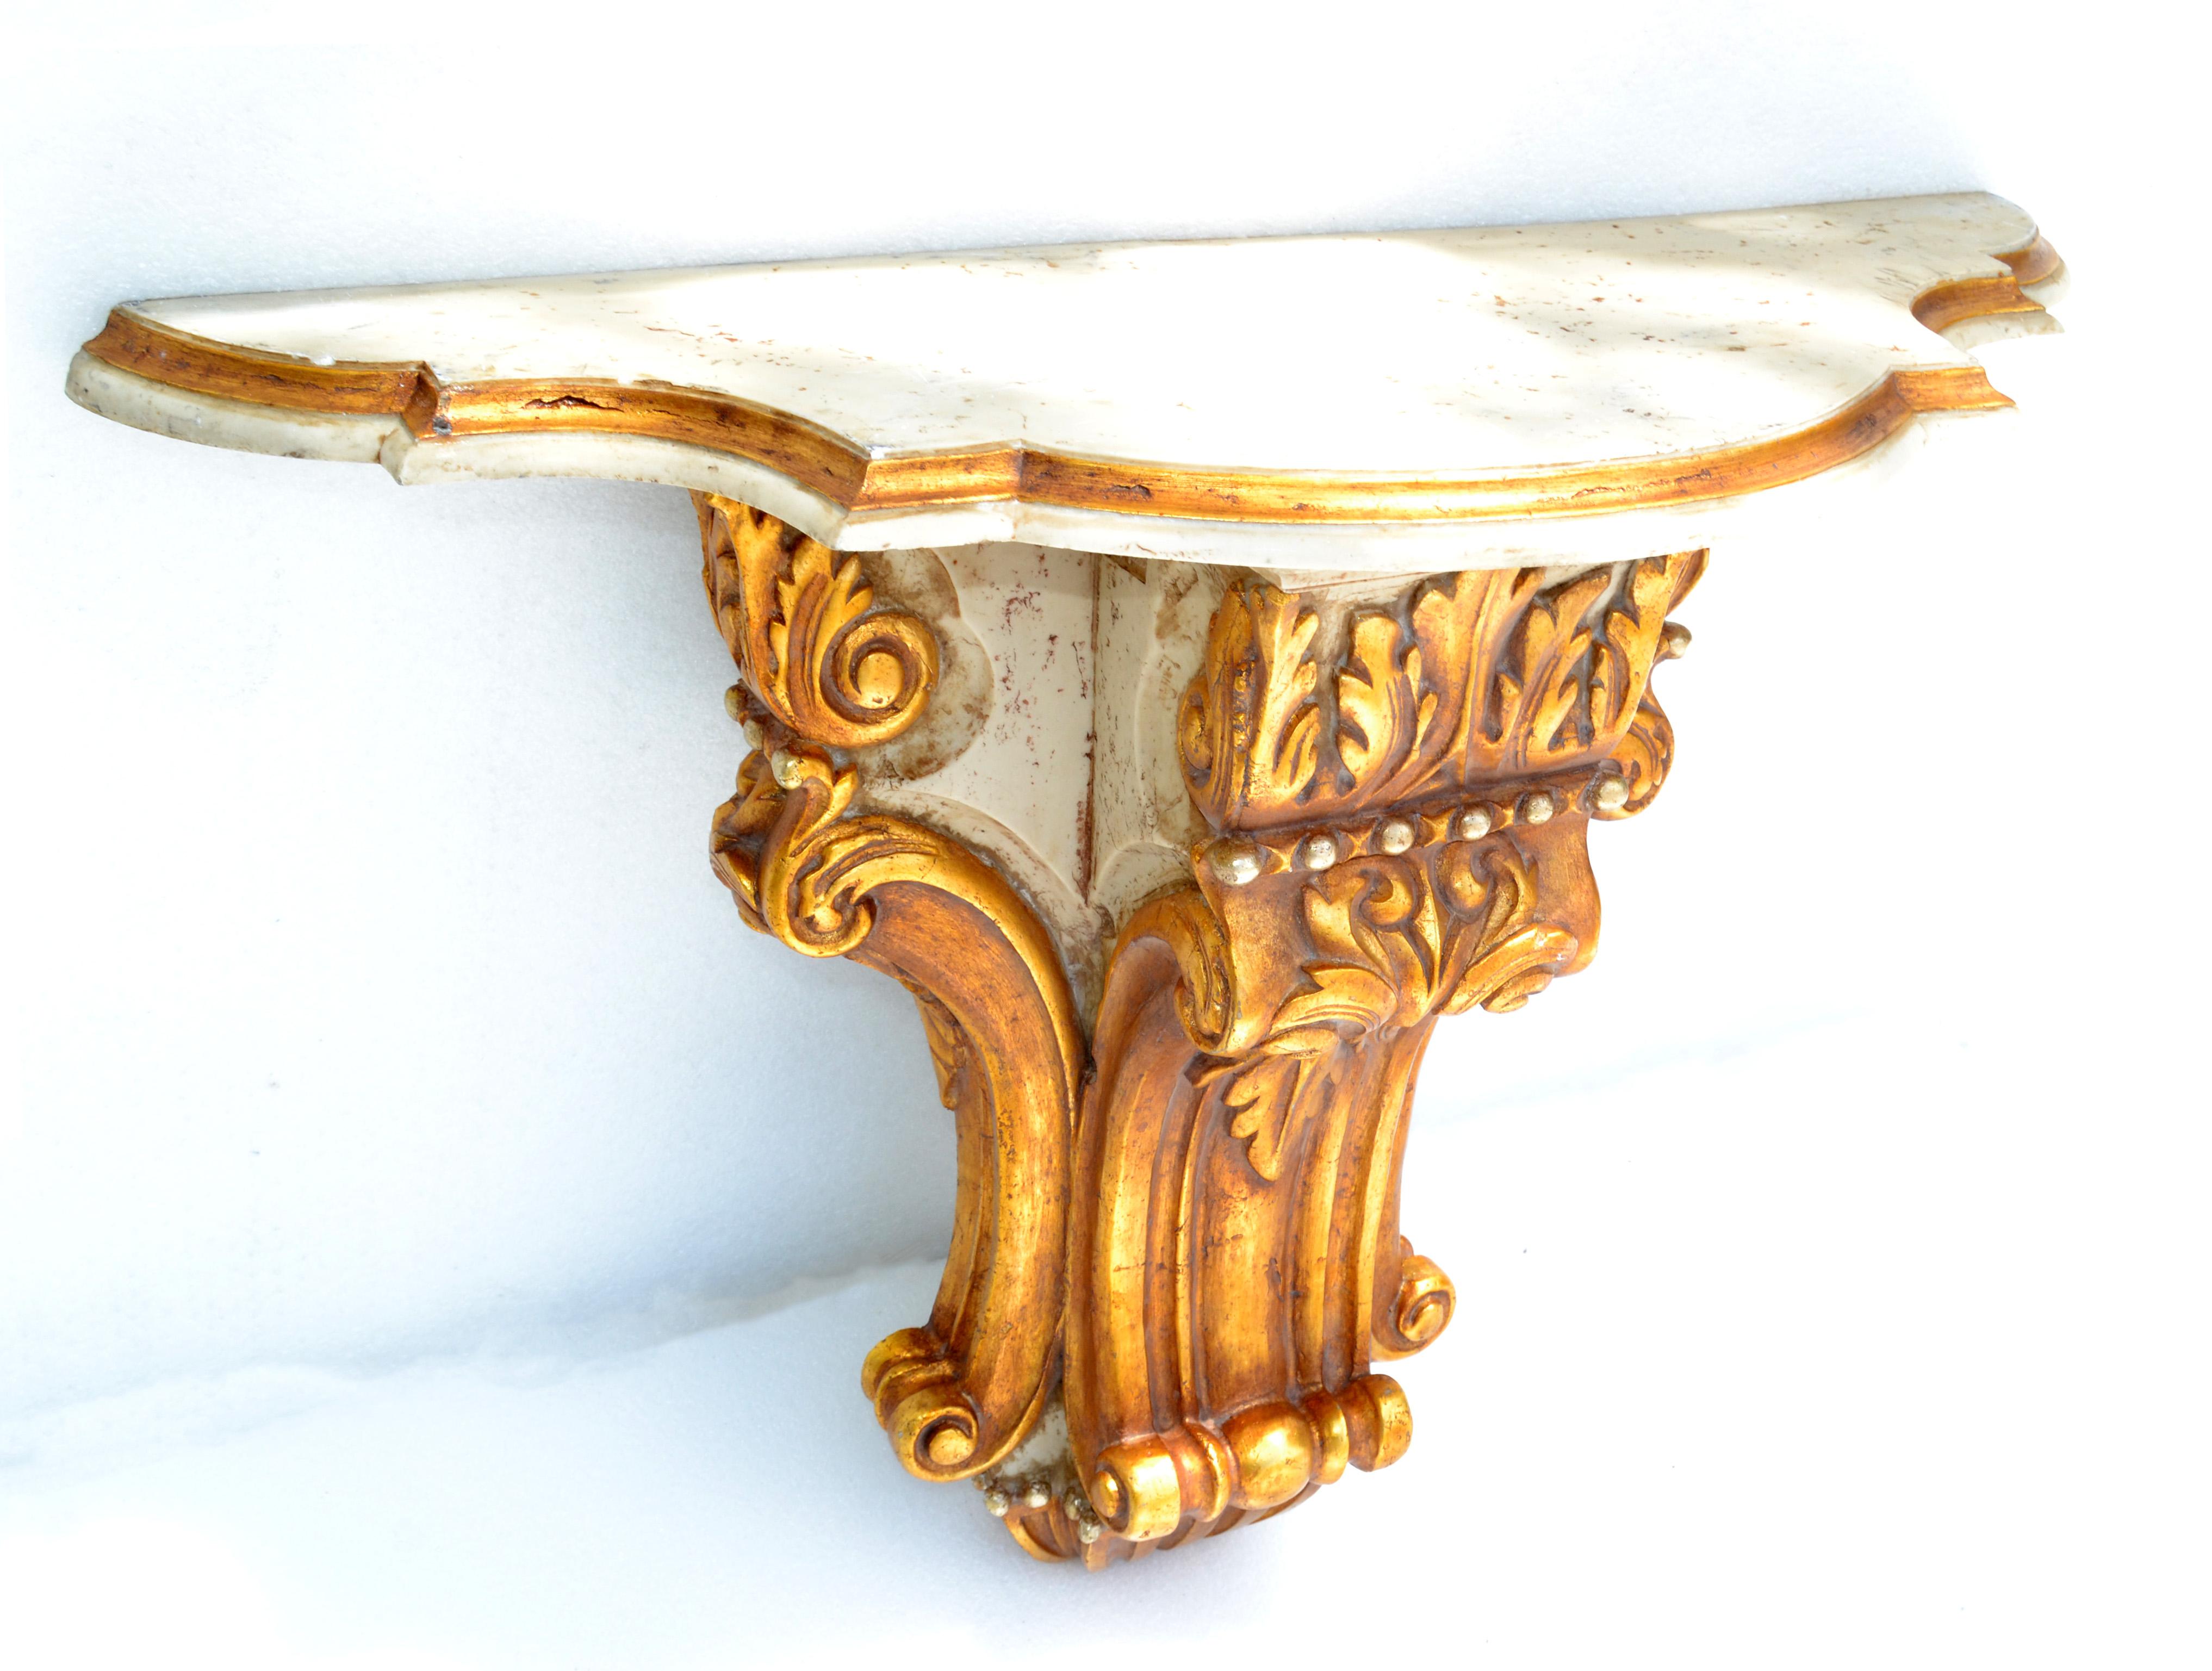 Wall mounted console table or shelf by Orejudo ??? made in Spain in the 1970.
Scrolled and hand carved wall bracket made out of Gilt wood and a Marble Top in taupe color with Gold border.
In original pristine vintage condition with some scratches